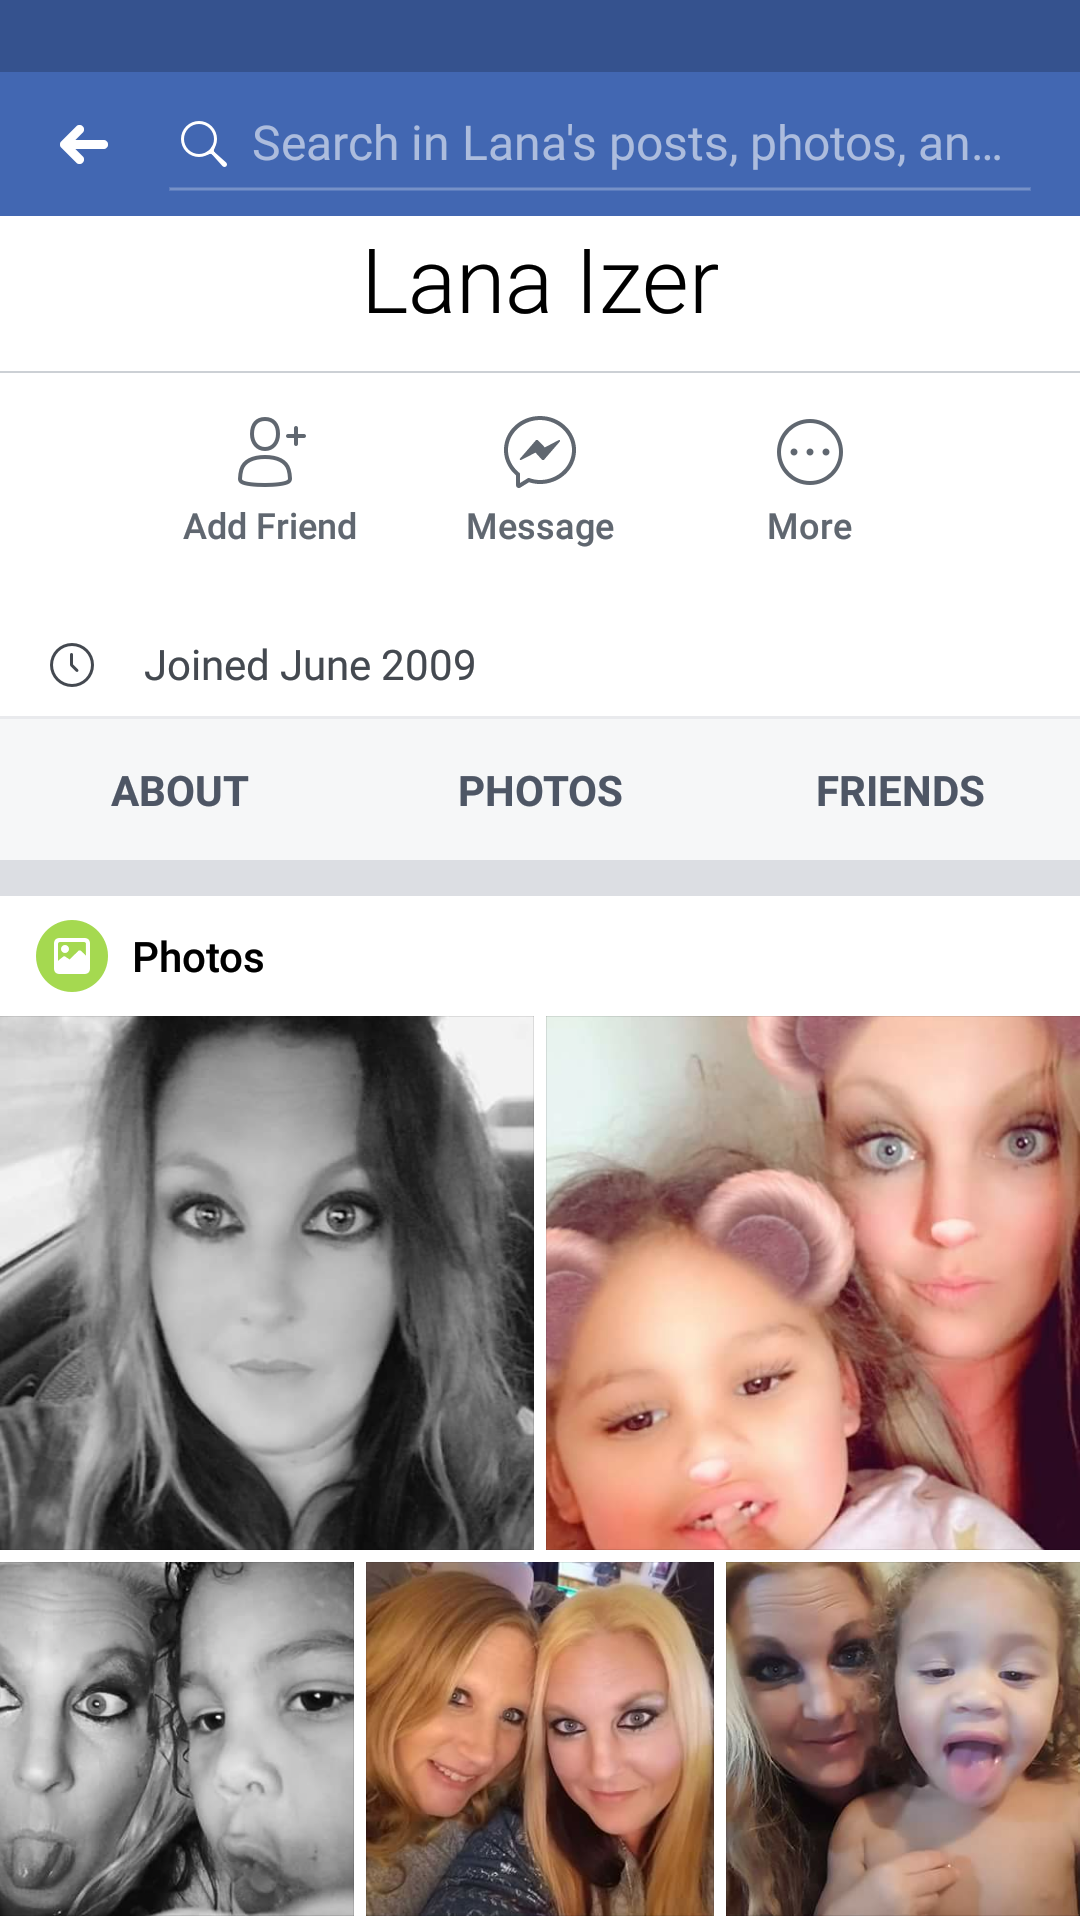 Face book page photos of this woman